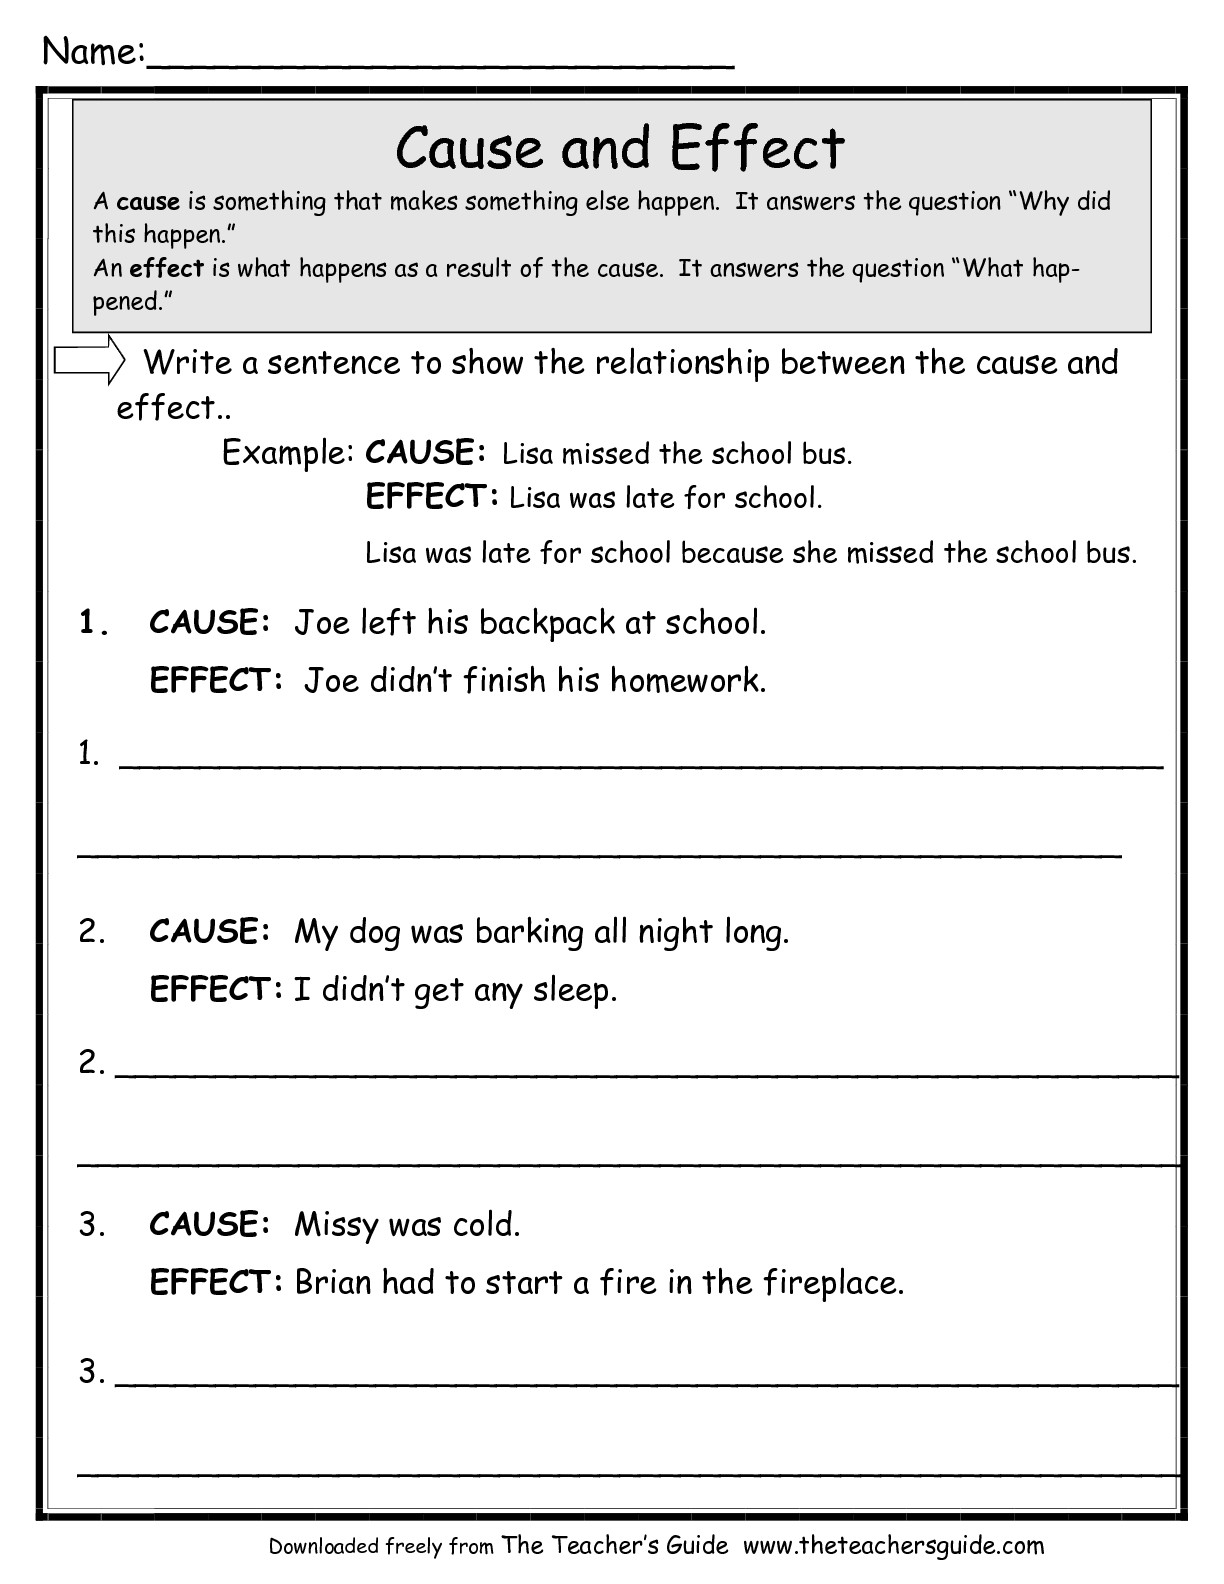 Free Cause and Effect Worksheets Image